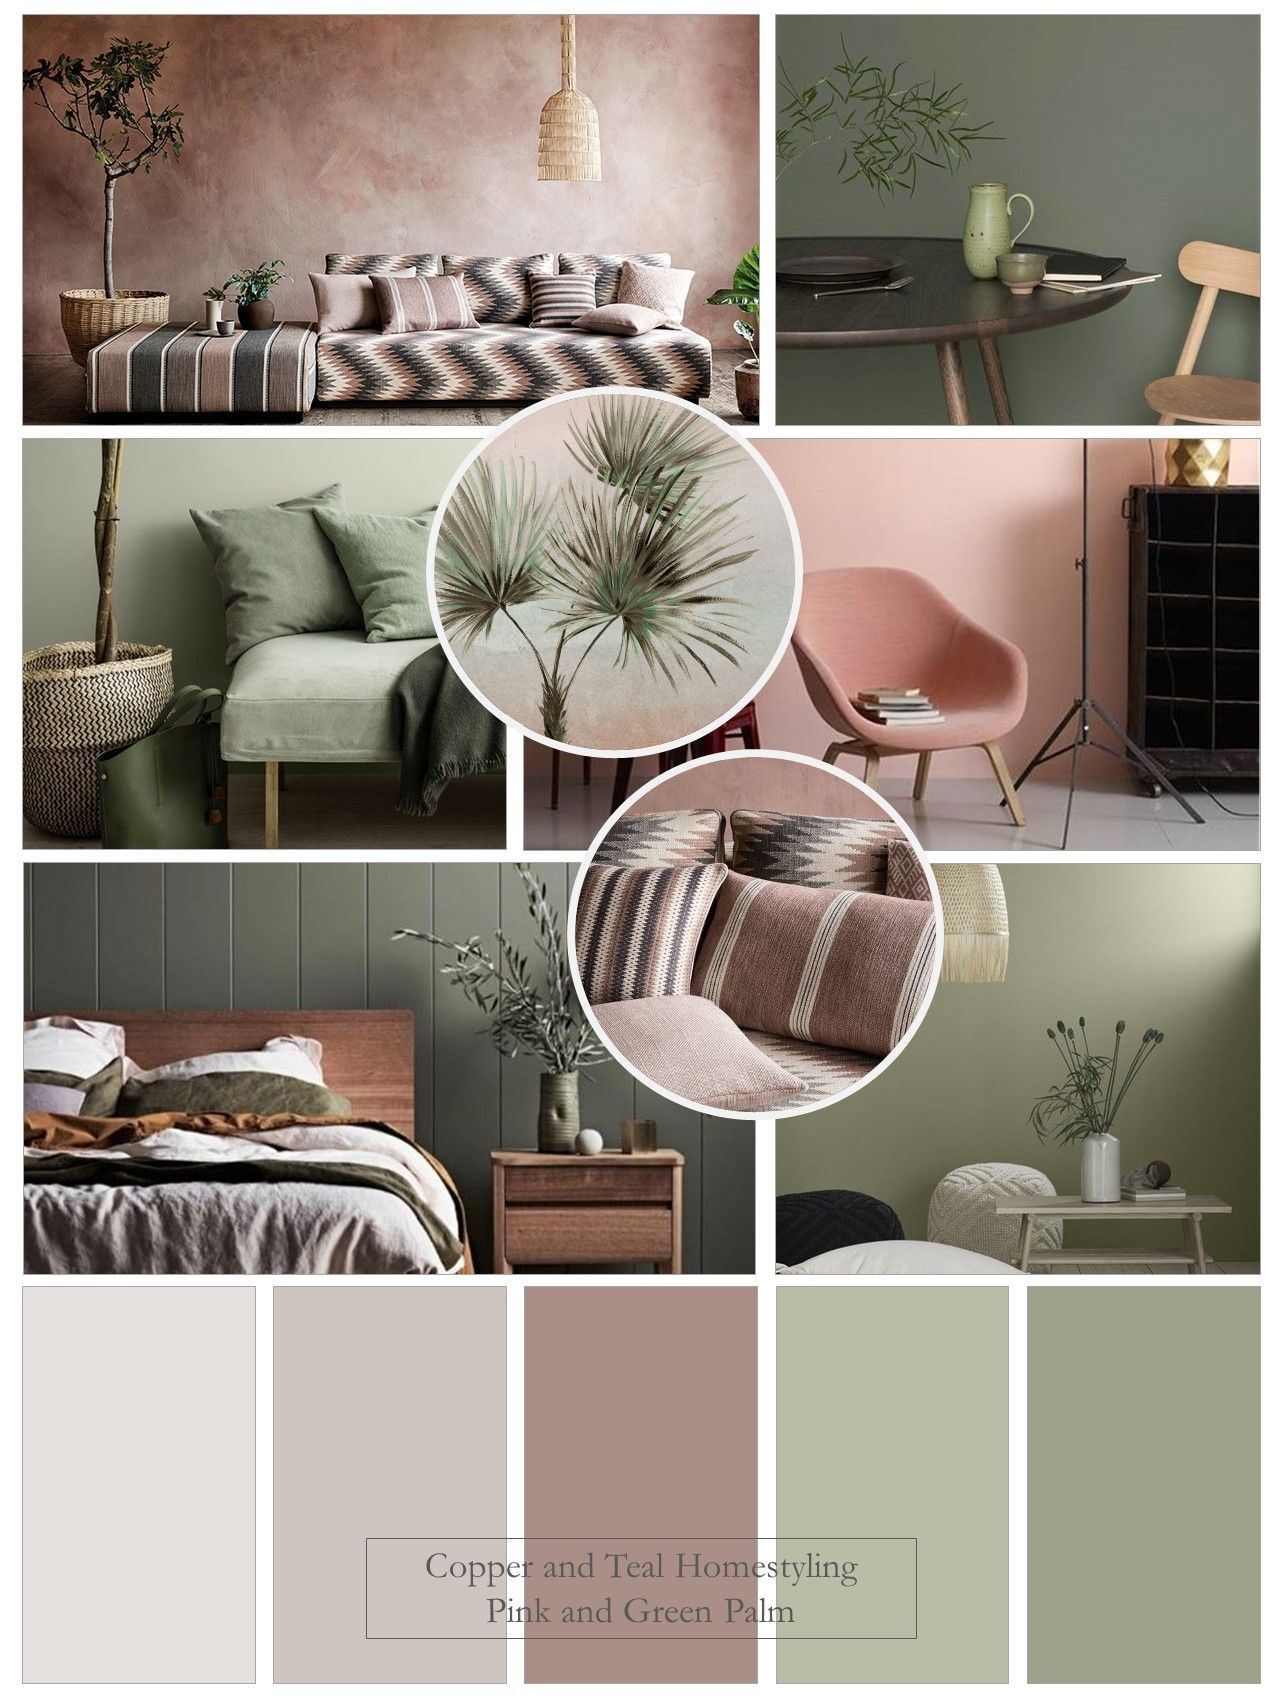 Farrow & Ball pink -   18 sage green bedroom colour palettes ideas